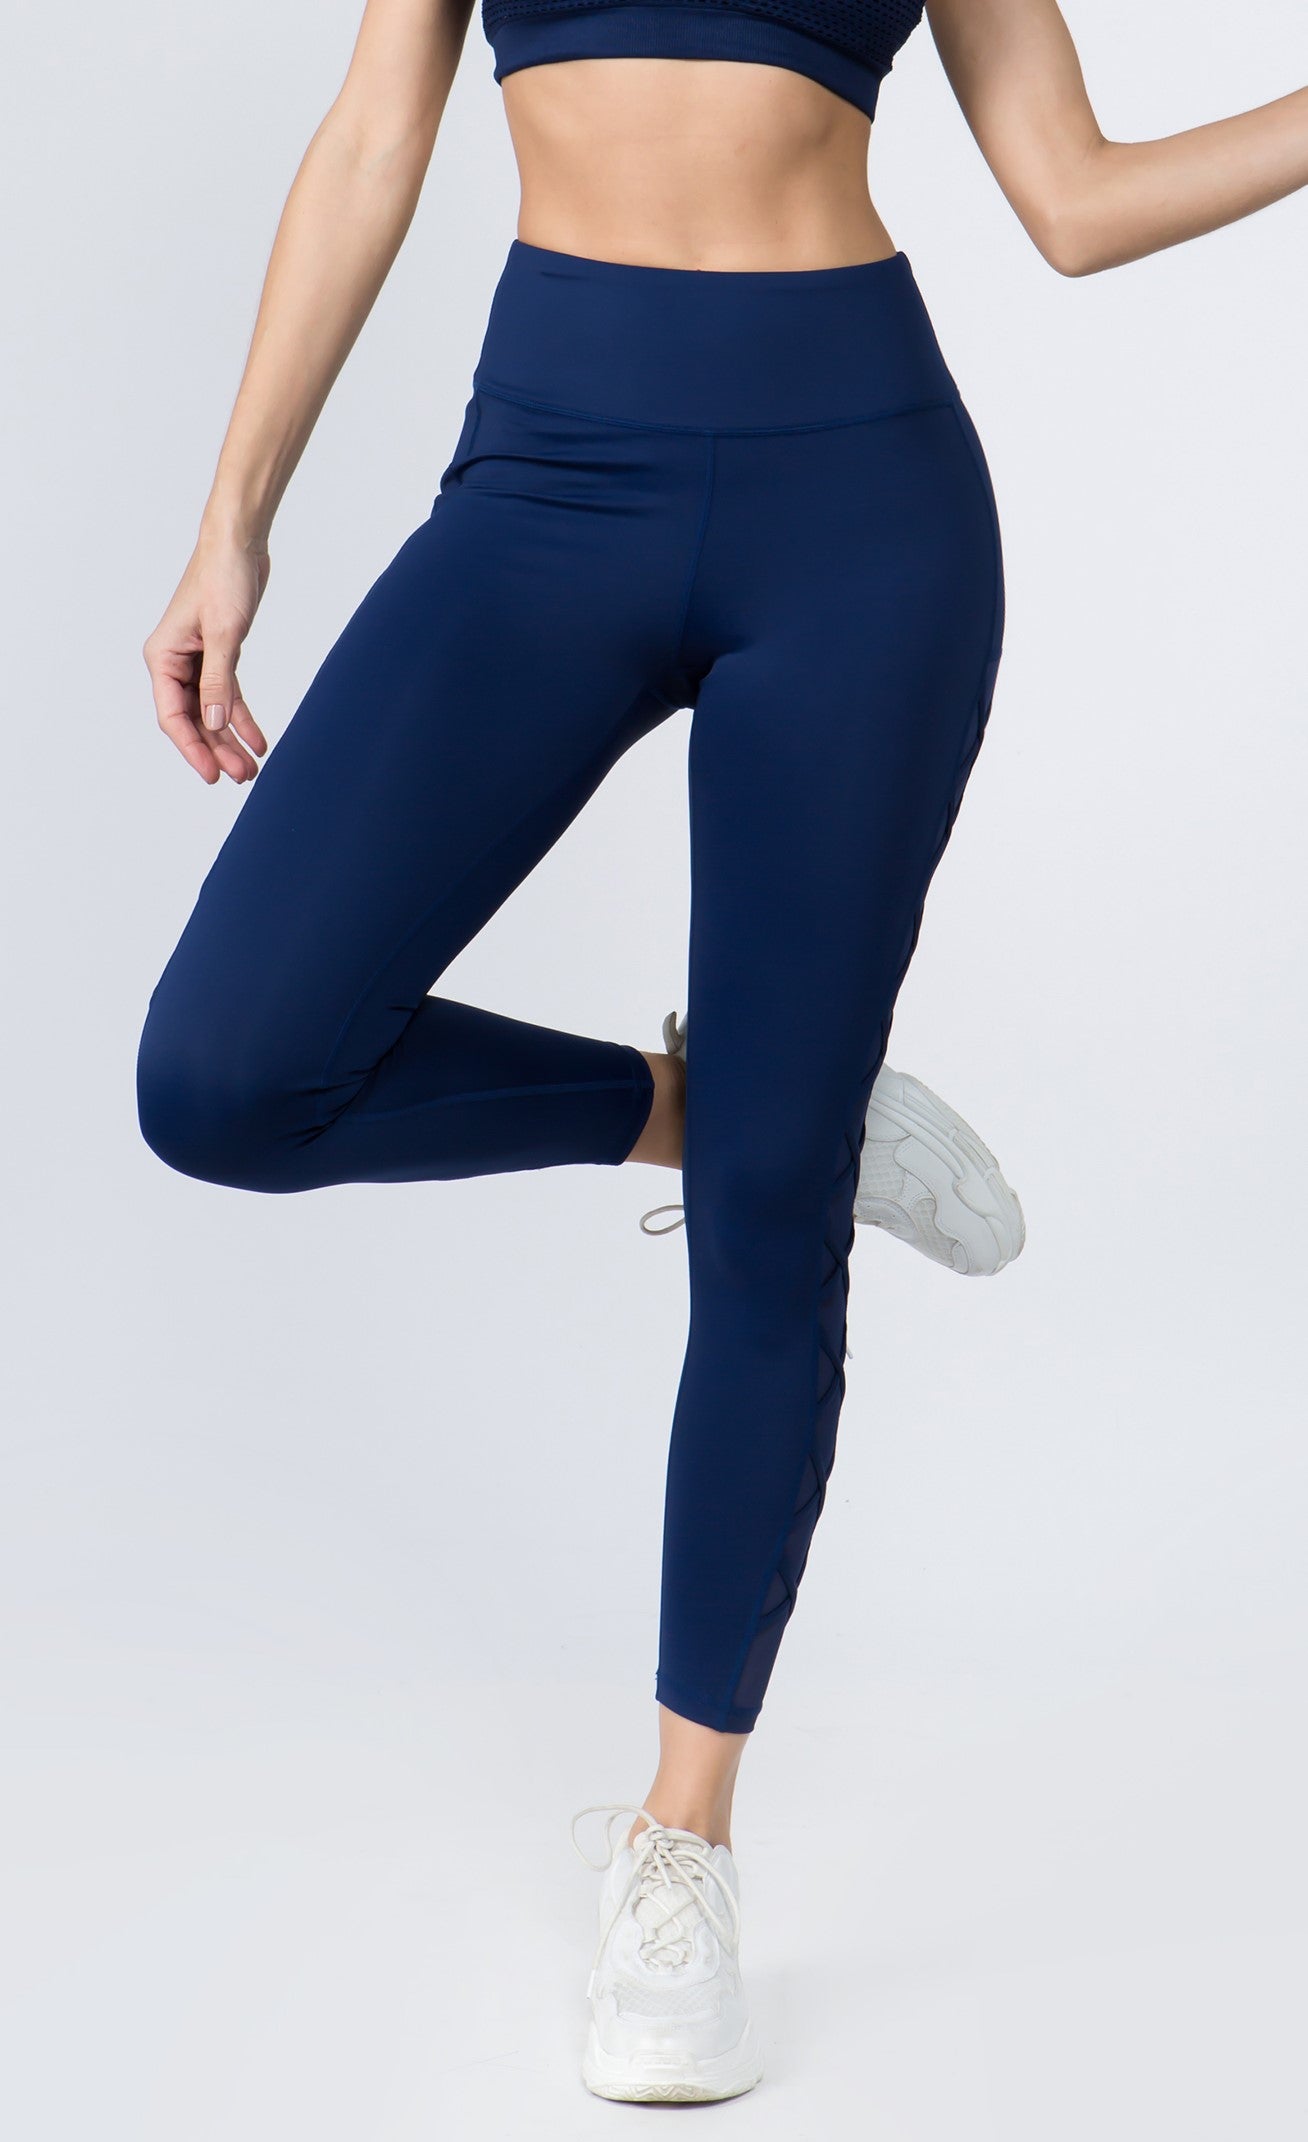 Free People Lace Athletic Leggings for Women